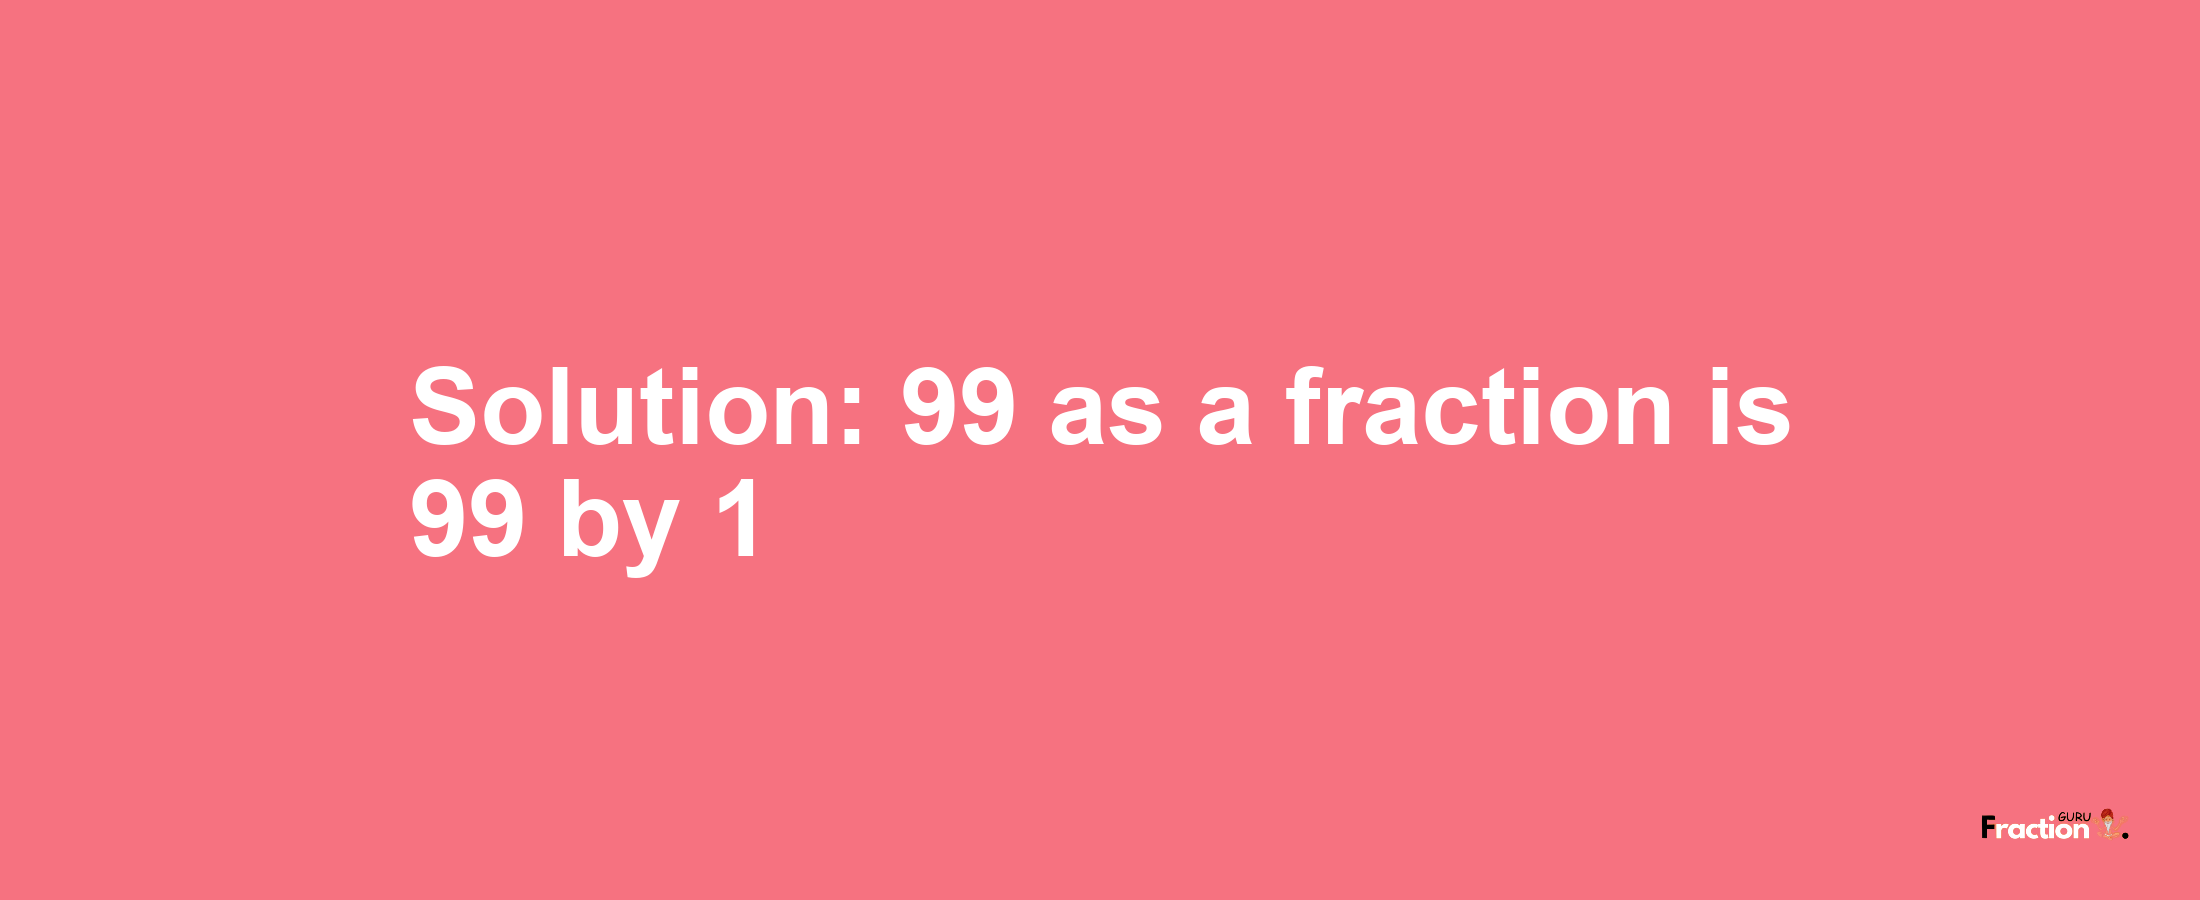 Solution:99 as a fraction is 99/1